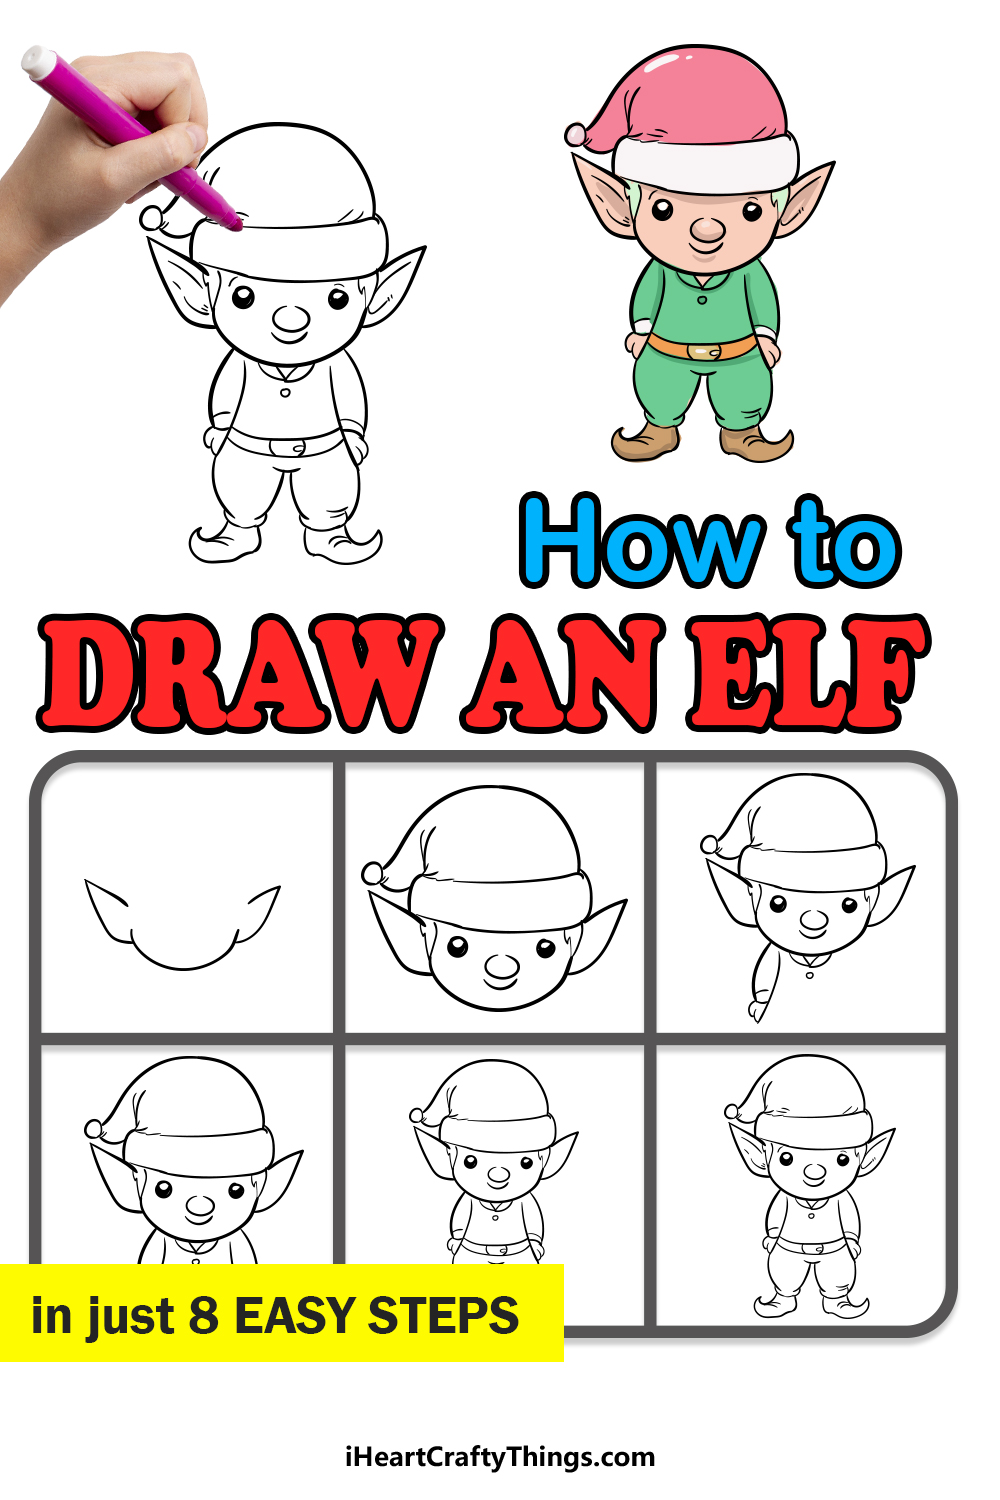 how to draw an elf in 8 easy steps